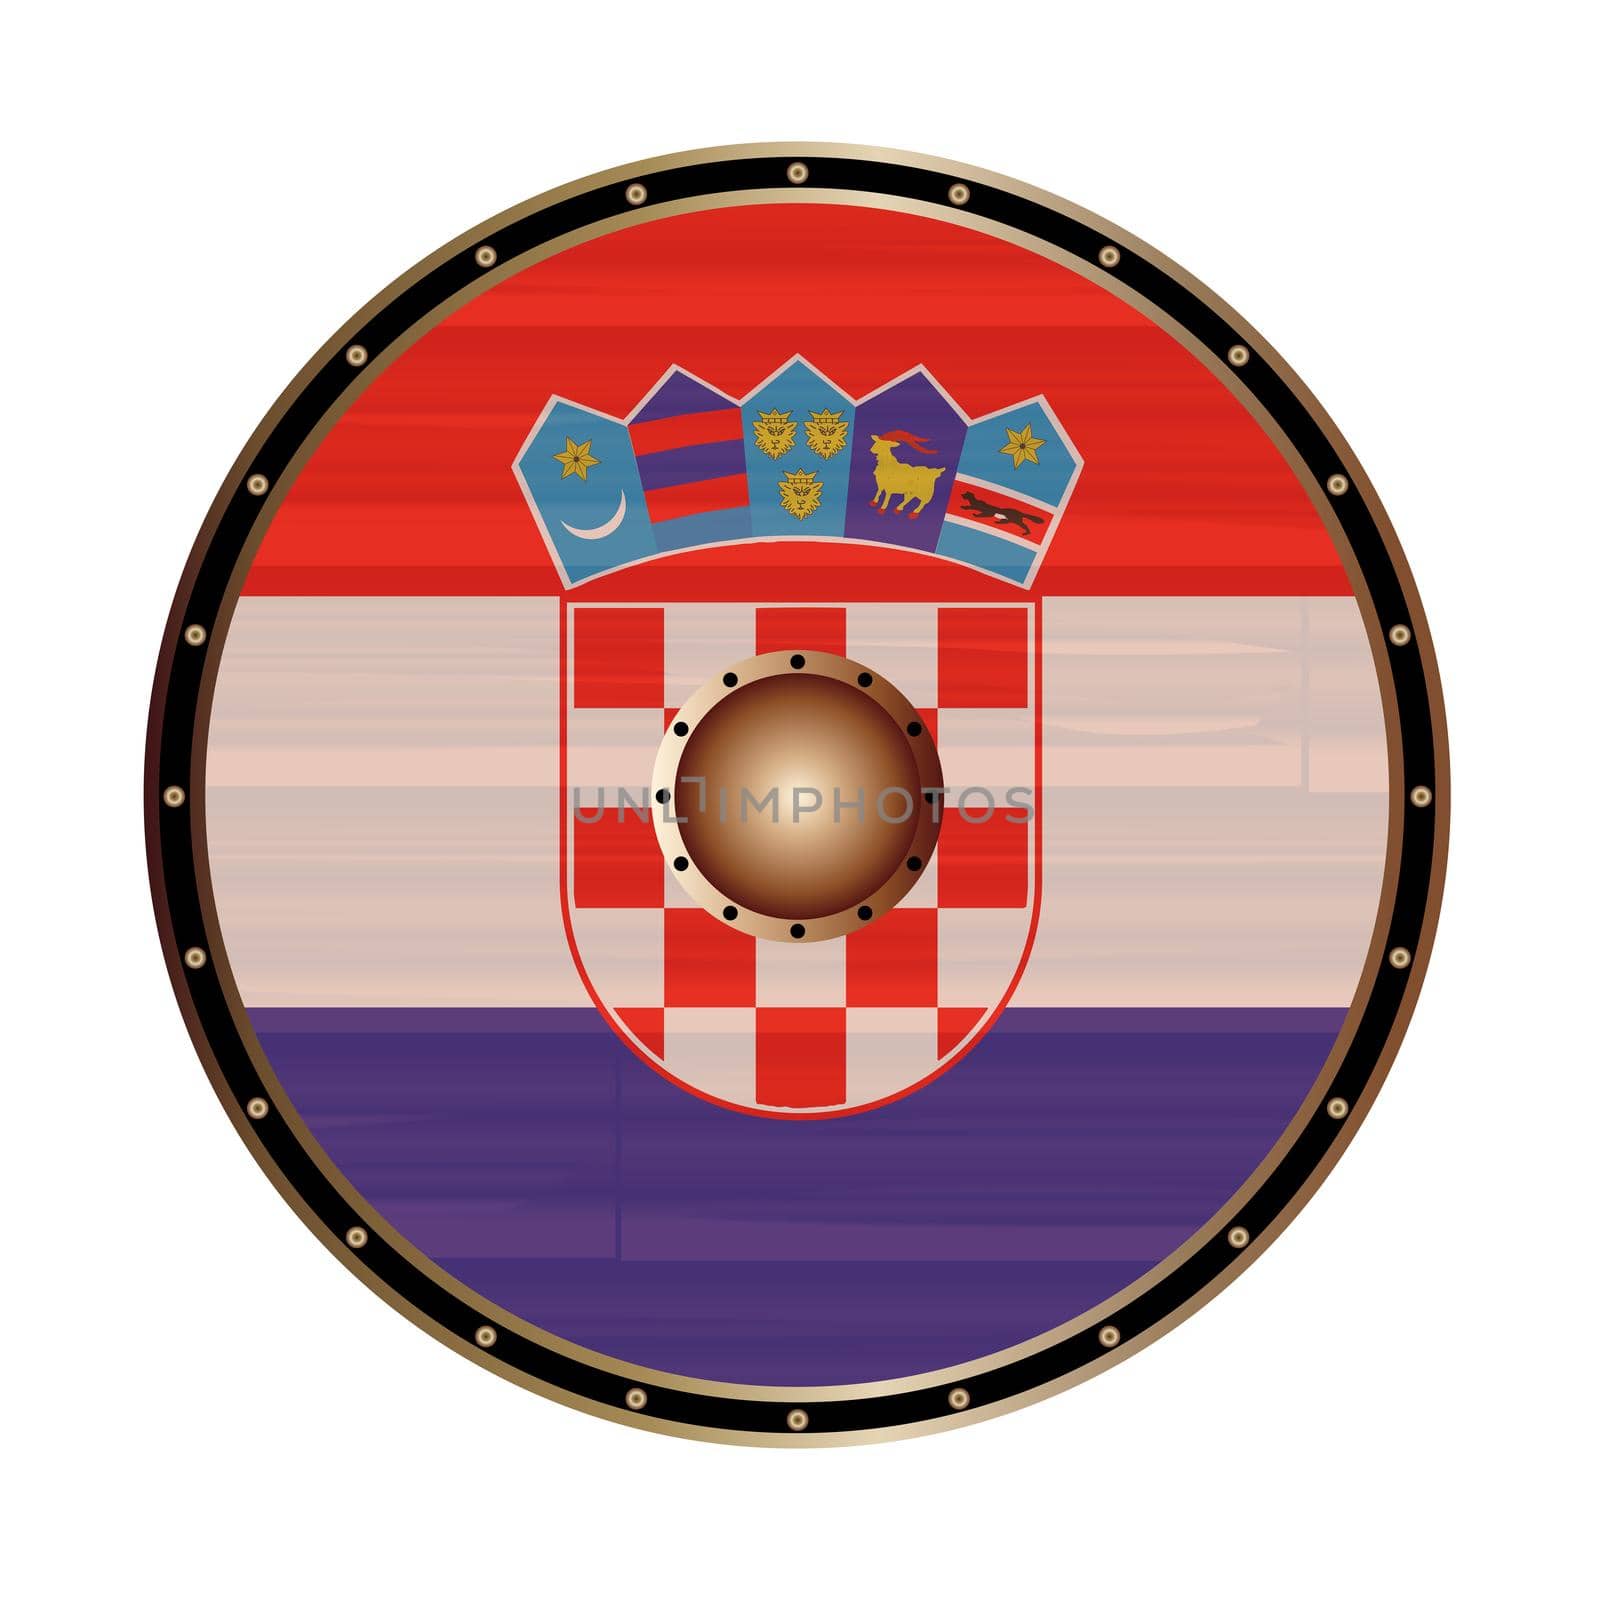 A Viking style round shield with the Croatian flag color design isolated on a white background